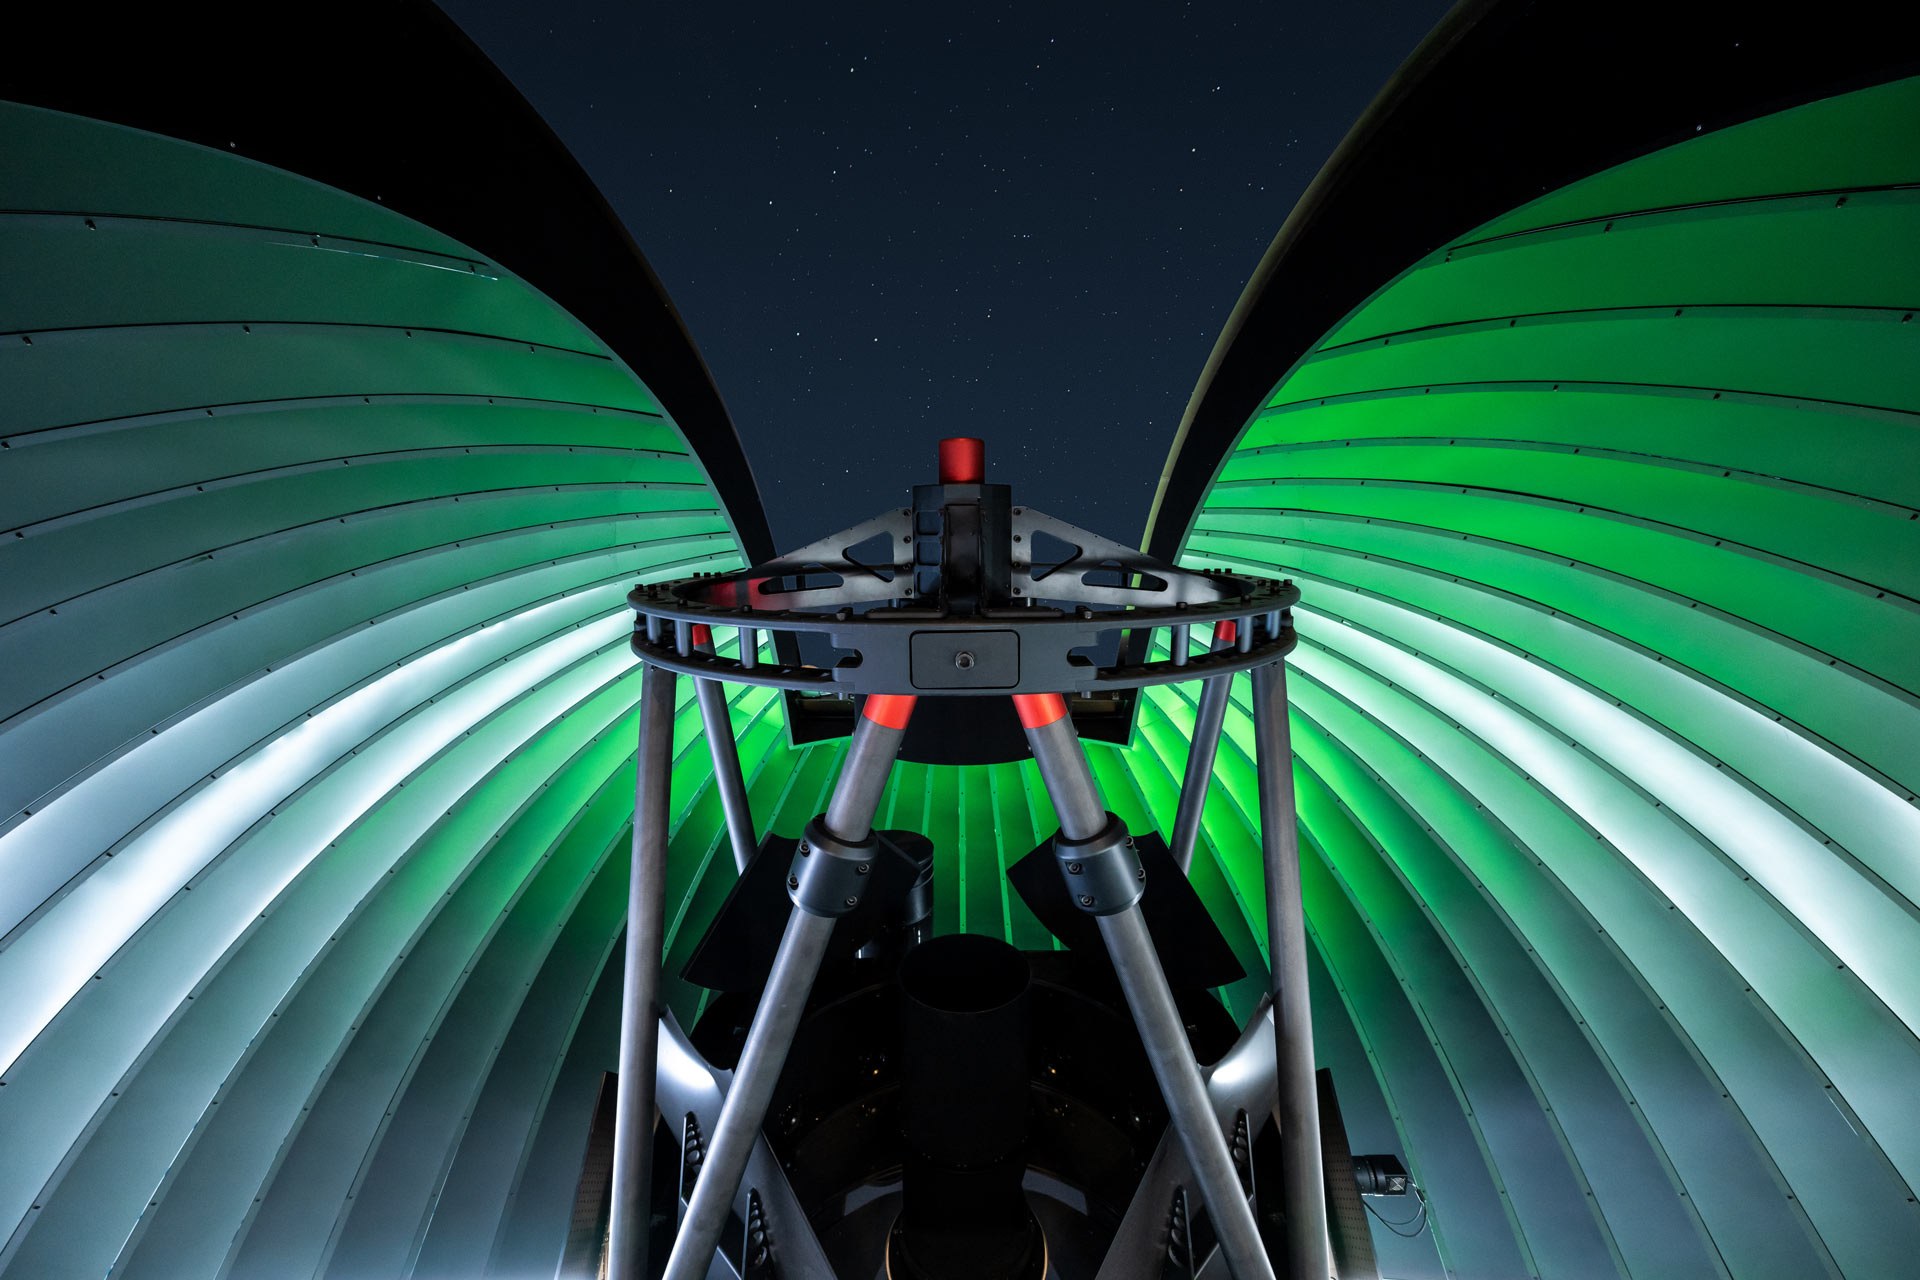 View of the telescope into the night sky above Empfingen